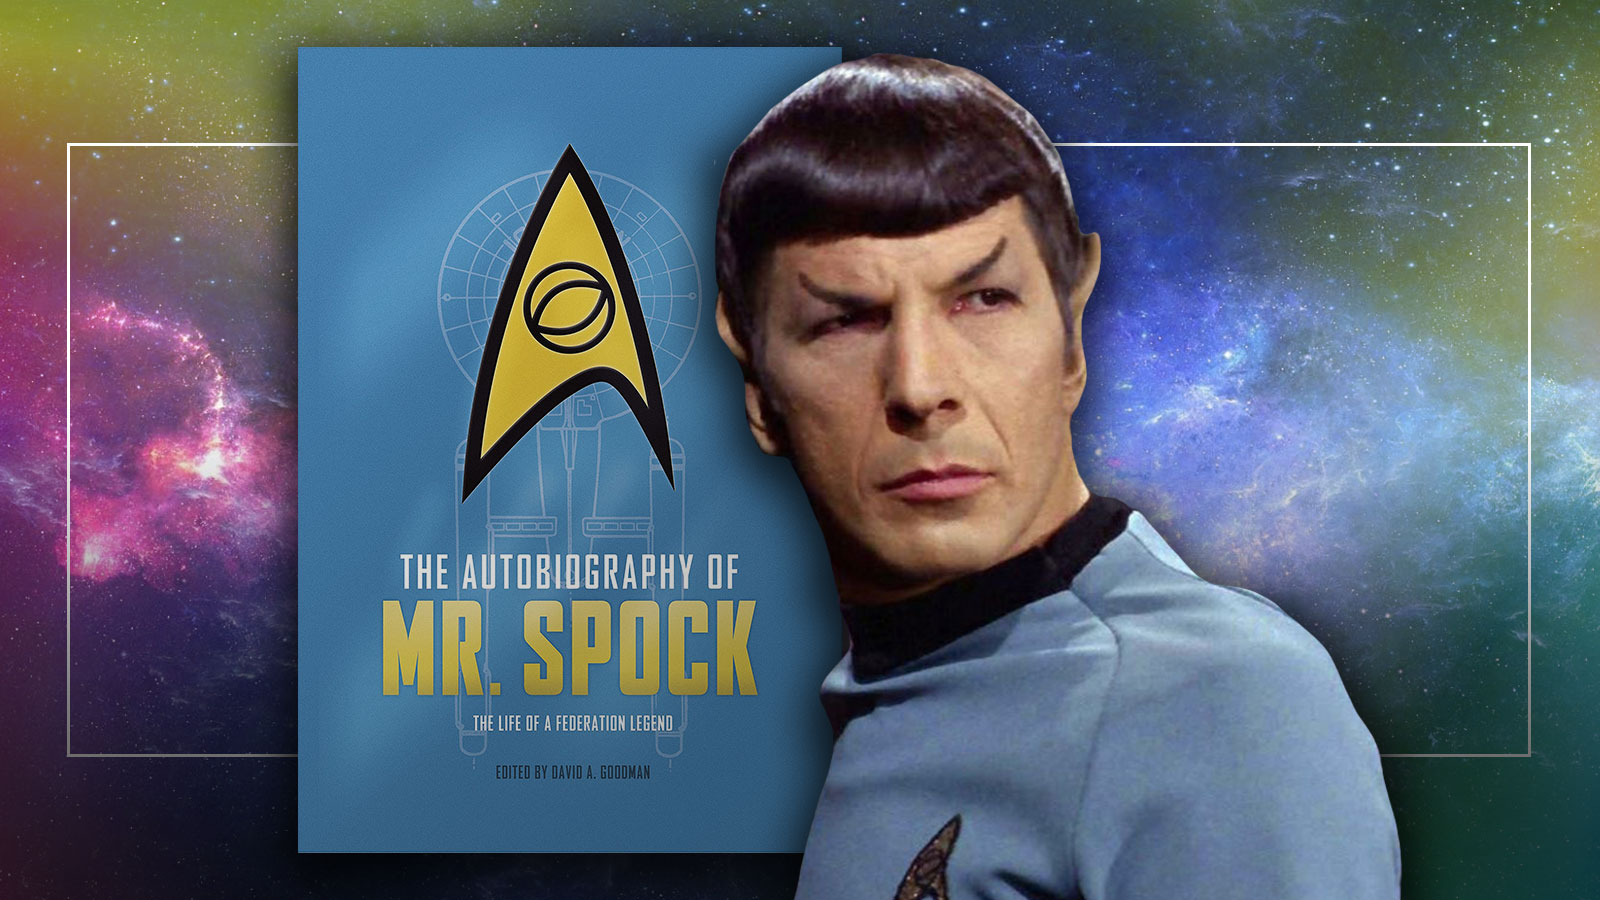 Autobiography of Mr. Spock